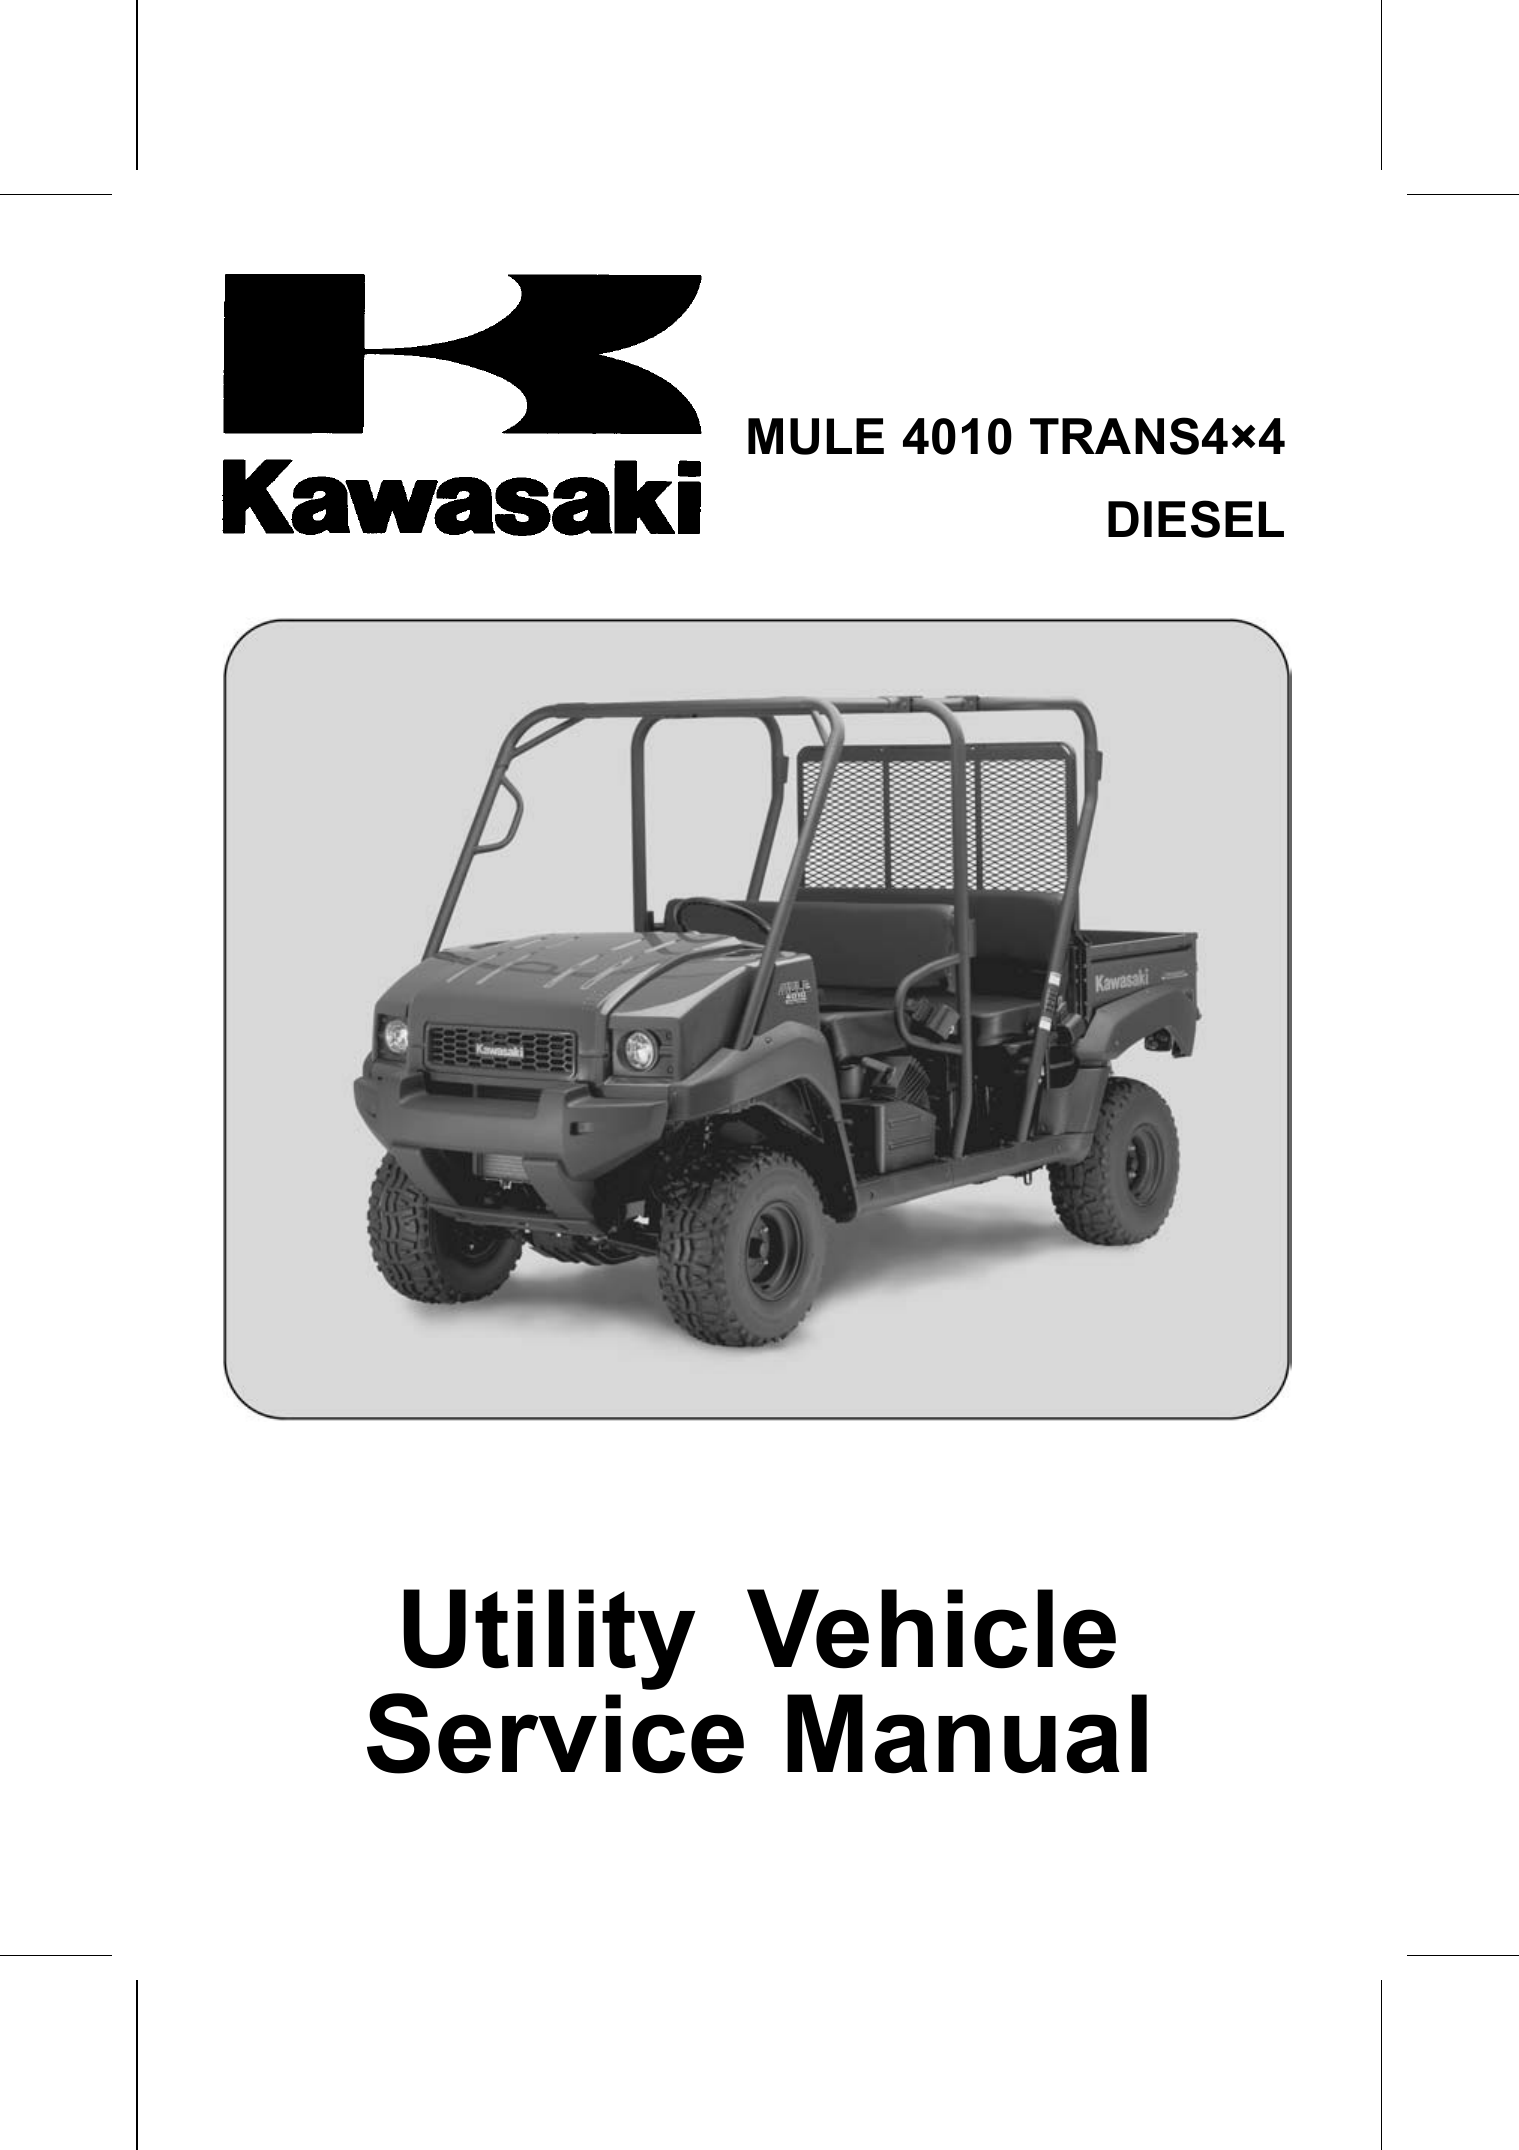 2009-2012 Kawasaki Mule 4010 Trans 4x4 Side by Side manual Preview image 6